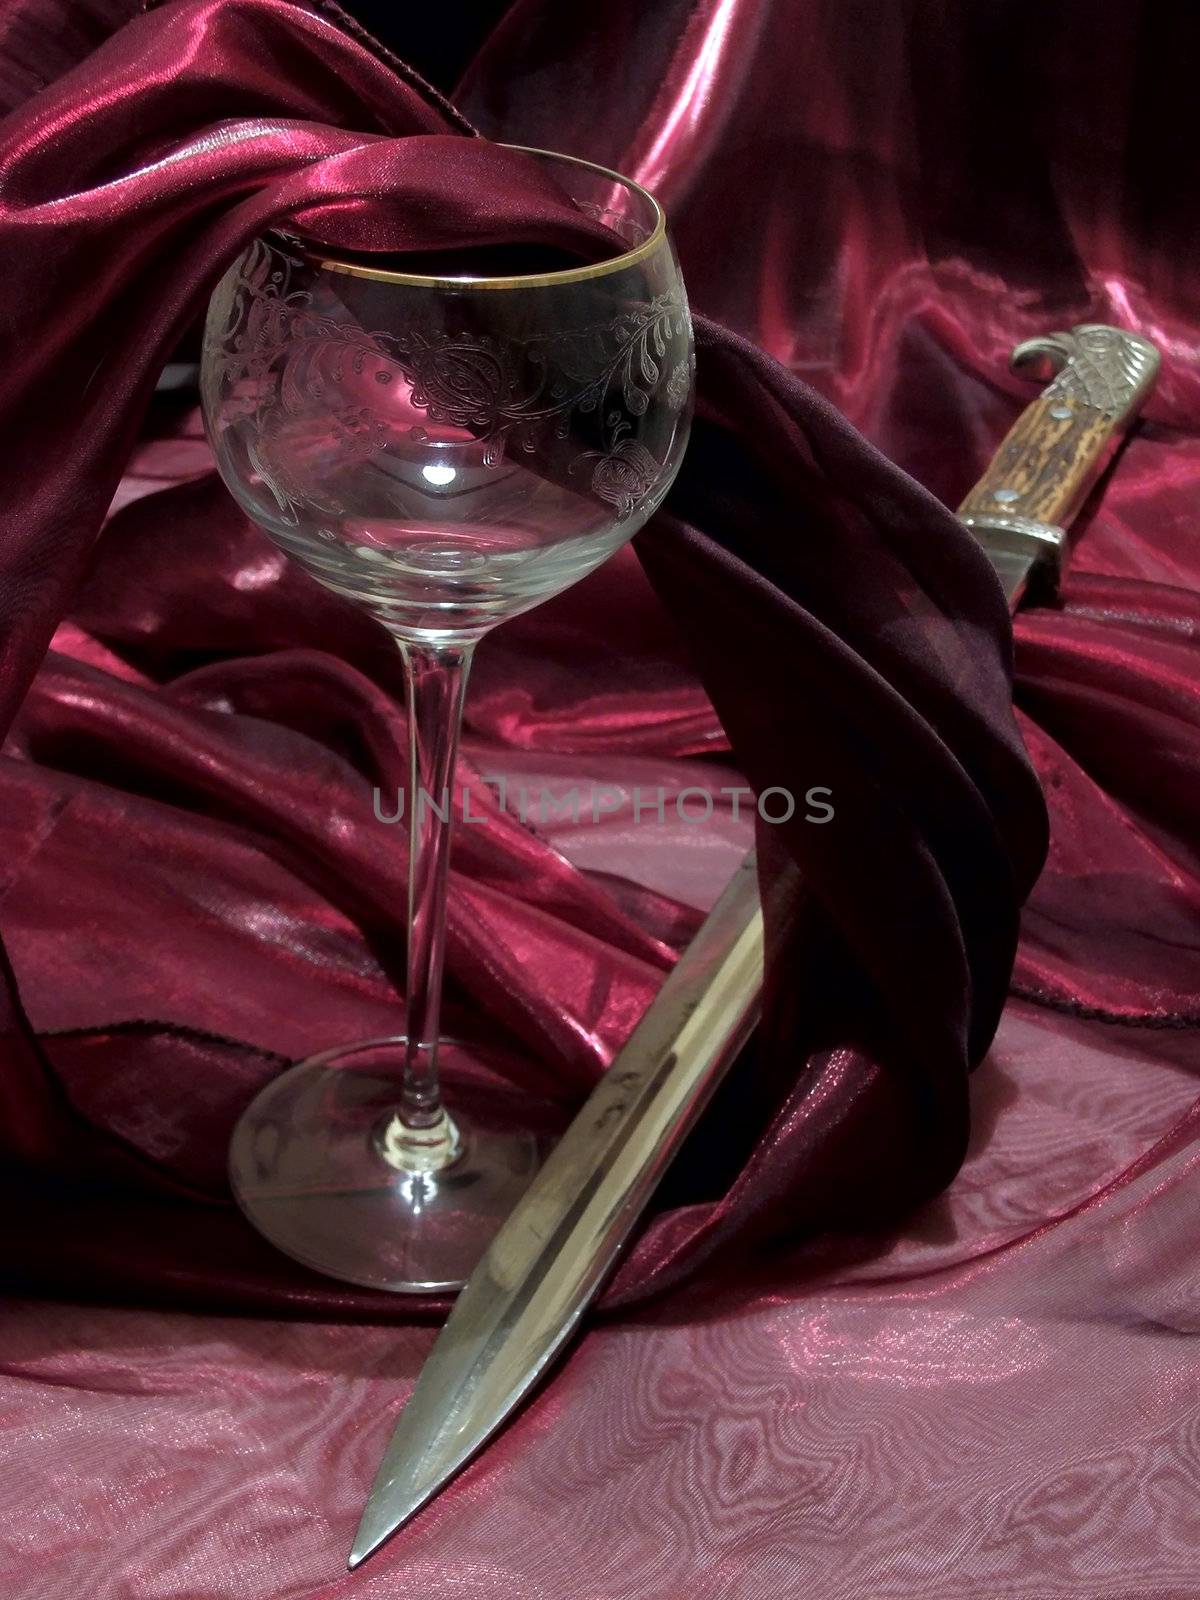 broken wineglass from crystal and bayonet among dark red tissue